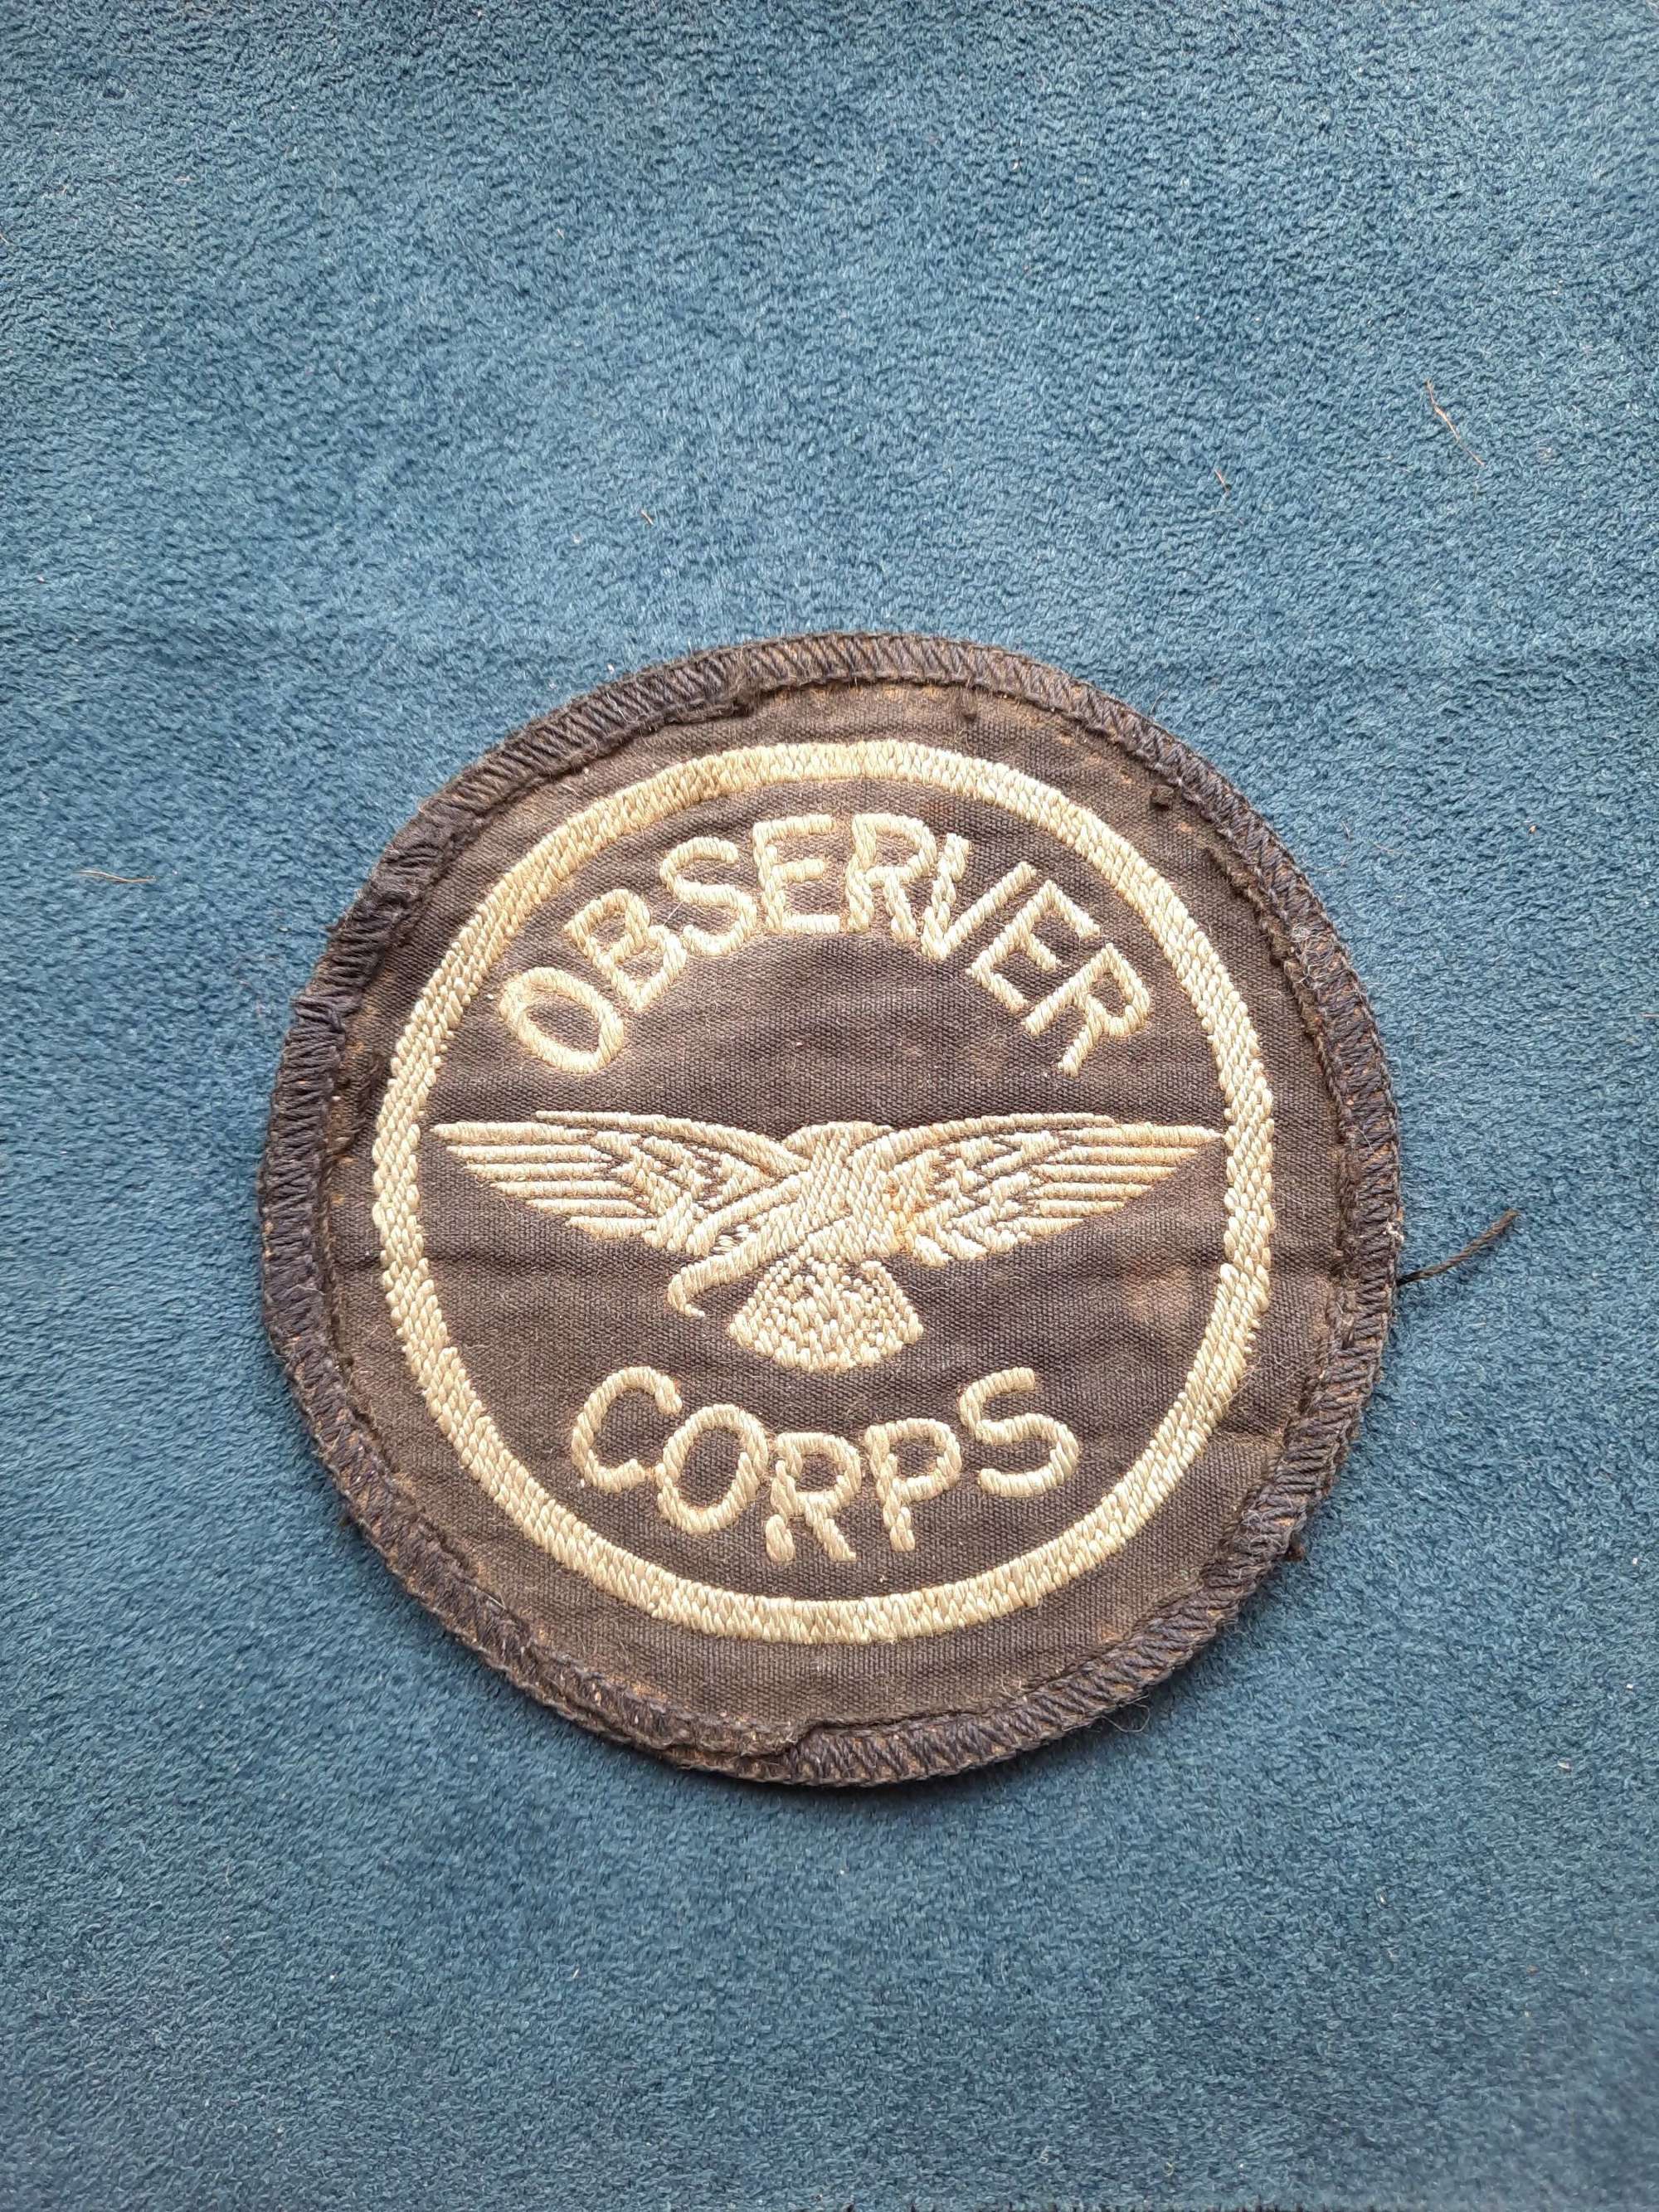 Observer Corps Patch